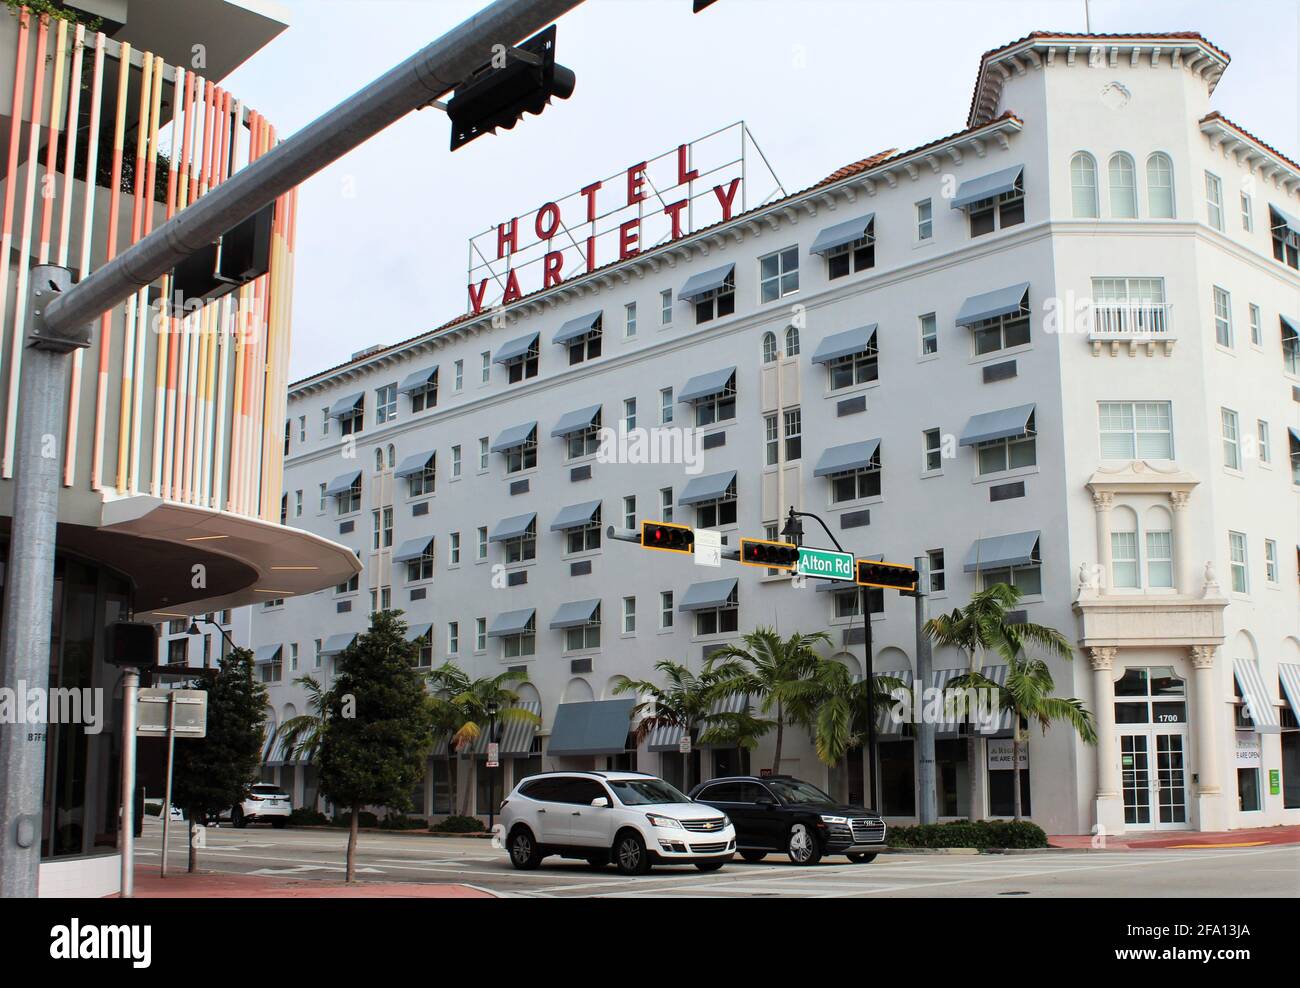 The Variety Hotel in Miami Beach, Florida. Located on Alton Road by South Beach. Century-old historic building in the heart of South Beach. Stock Photo